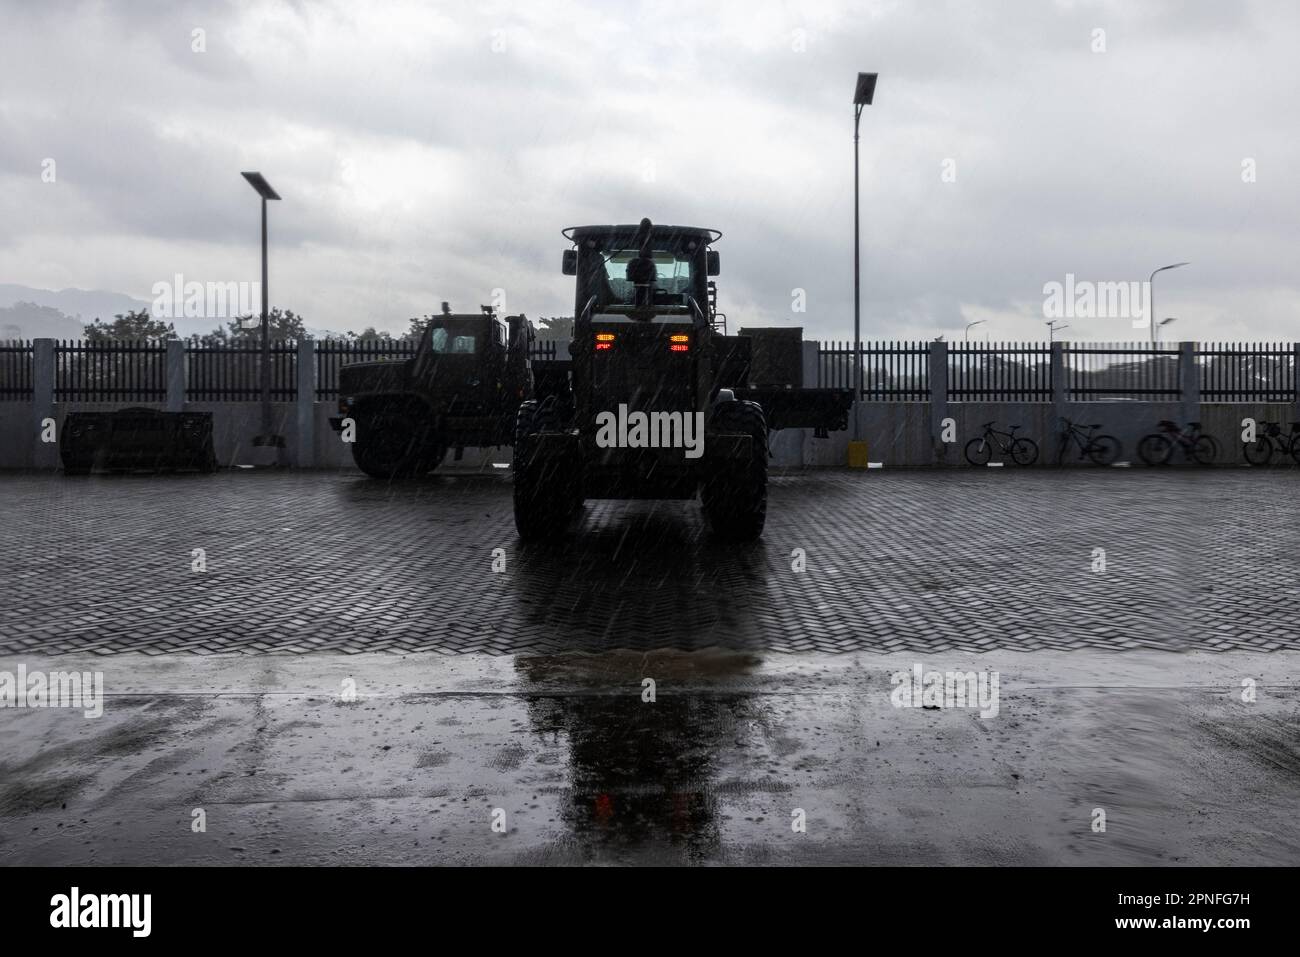 A U.S. Marine with 3rd Landing Support Battalion, operates a forklift during combined joint logistics over-the-shore operations in preparation for Balikatan 23 at Camp Agnew, Casiguran, Philippines, April 13, 2023. A combined force of logisticians and support personnel from the Armed Forces of the Philippines and the U.S. military are planning and executing a combined joint logistics over-the-shore event during Balikatan 2023, the annual bilateral exercise between the two Allies. This complex process increases their mutual proficiency in supplying forces ashore in an expeditionary environment. Stock Photo